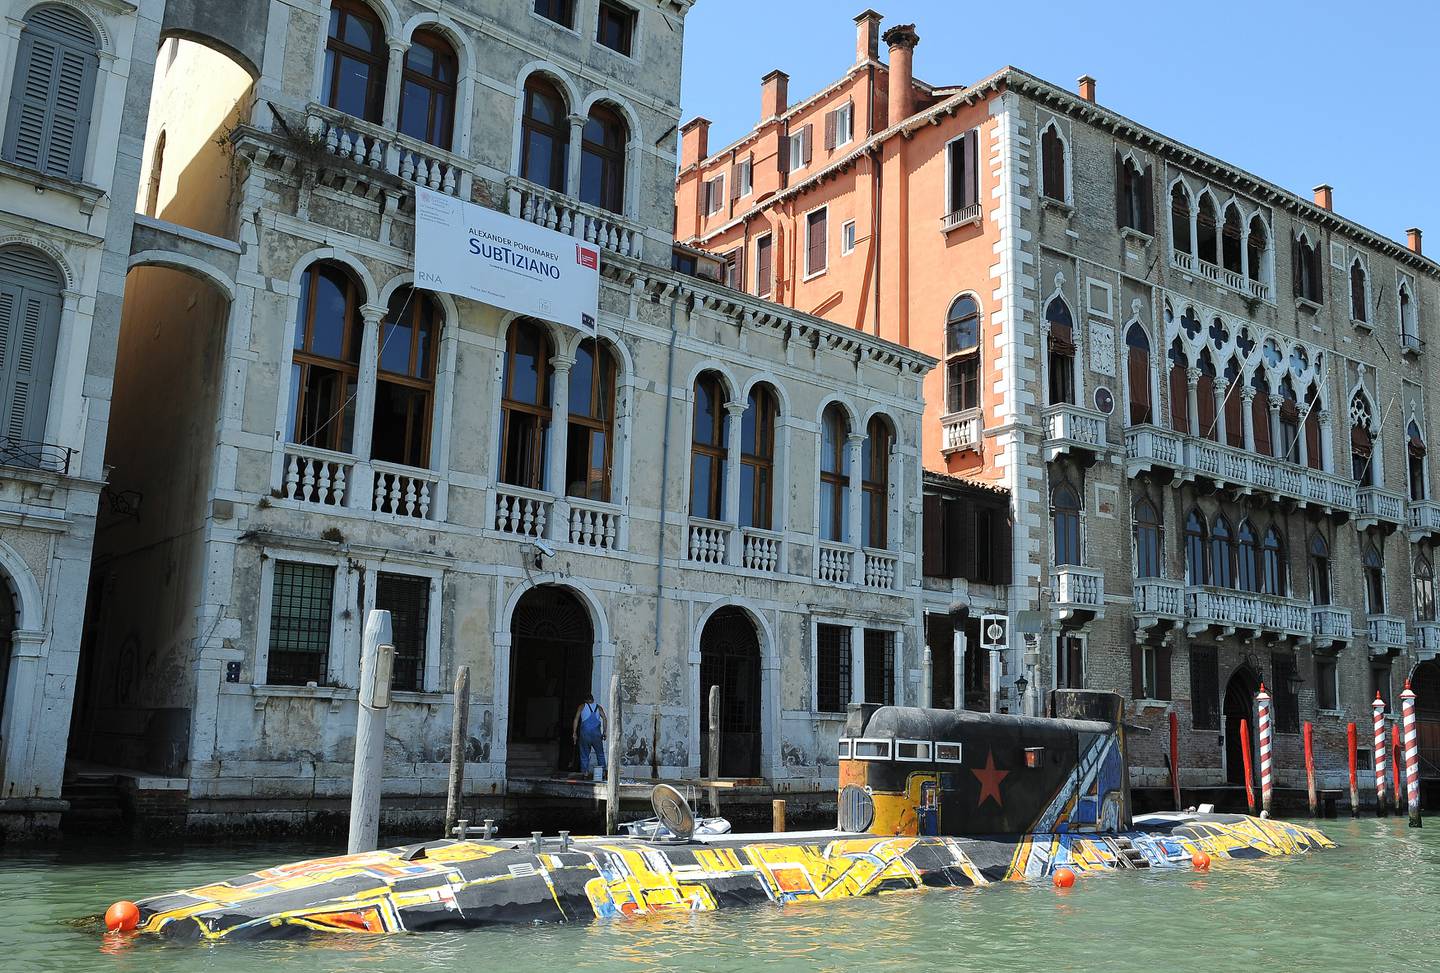 This year's Venice Biennale is expected to go ahead after being postponed in 2020. AFP